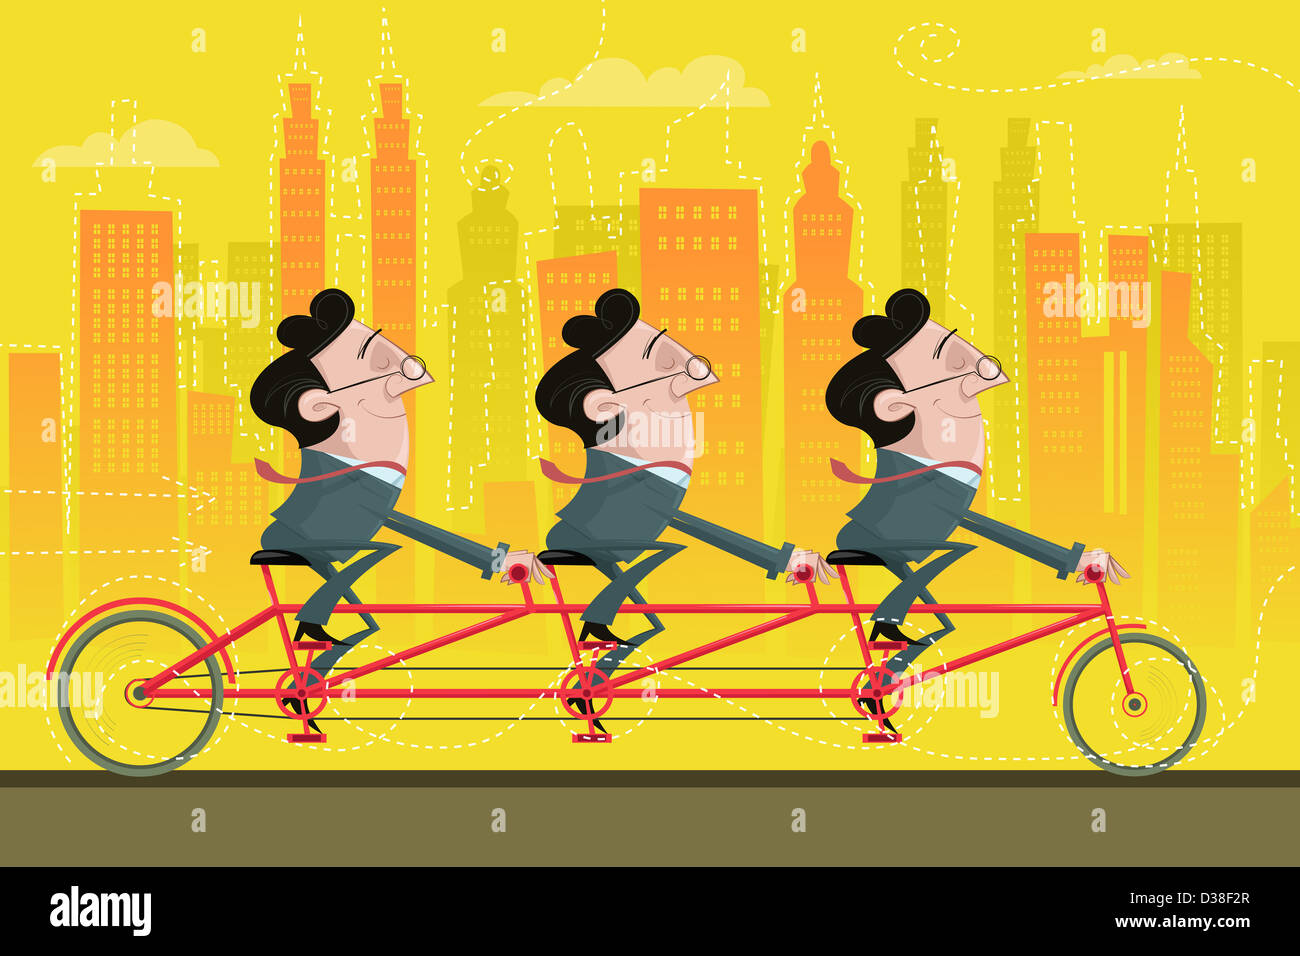 Illustrative image of happy businessmen riding bicycle together representing partnership Stock Photo